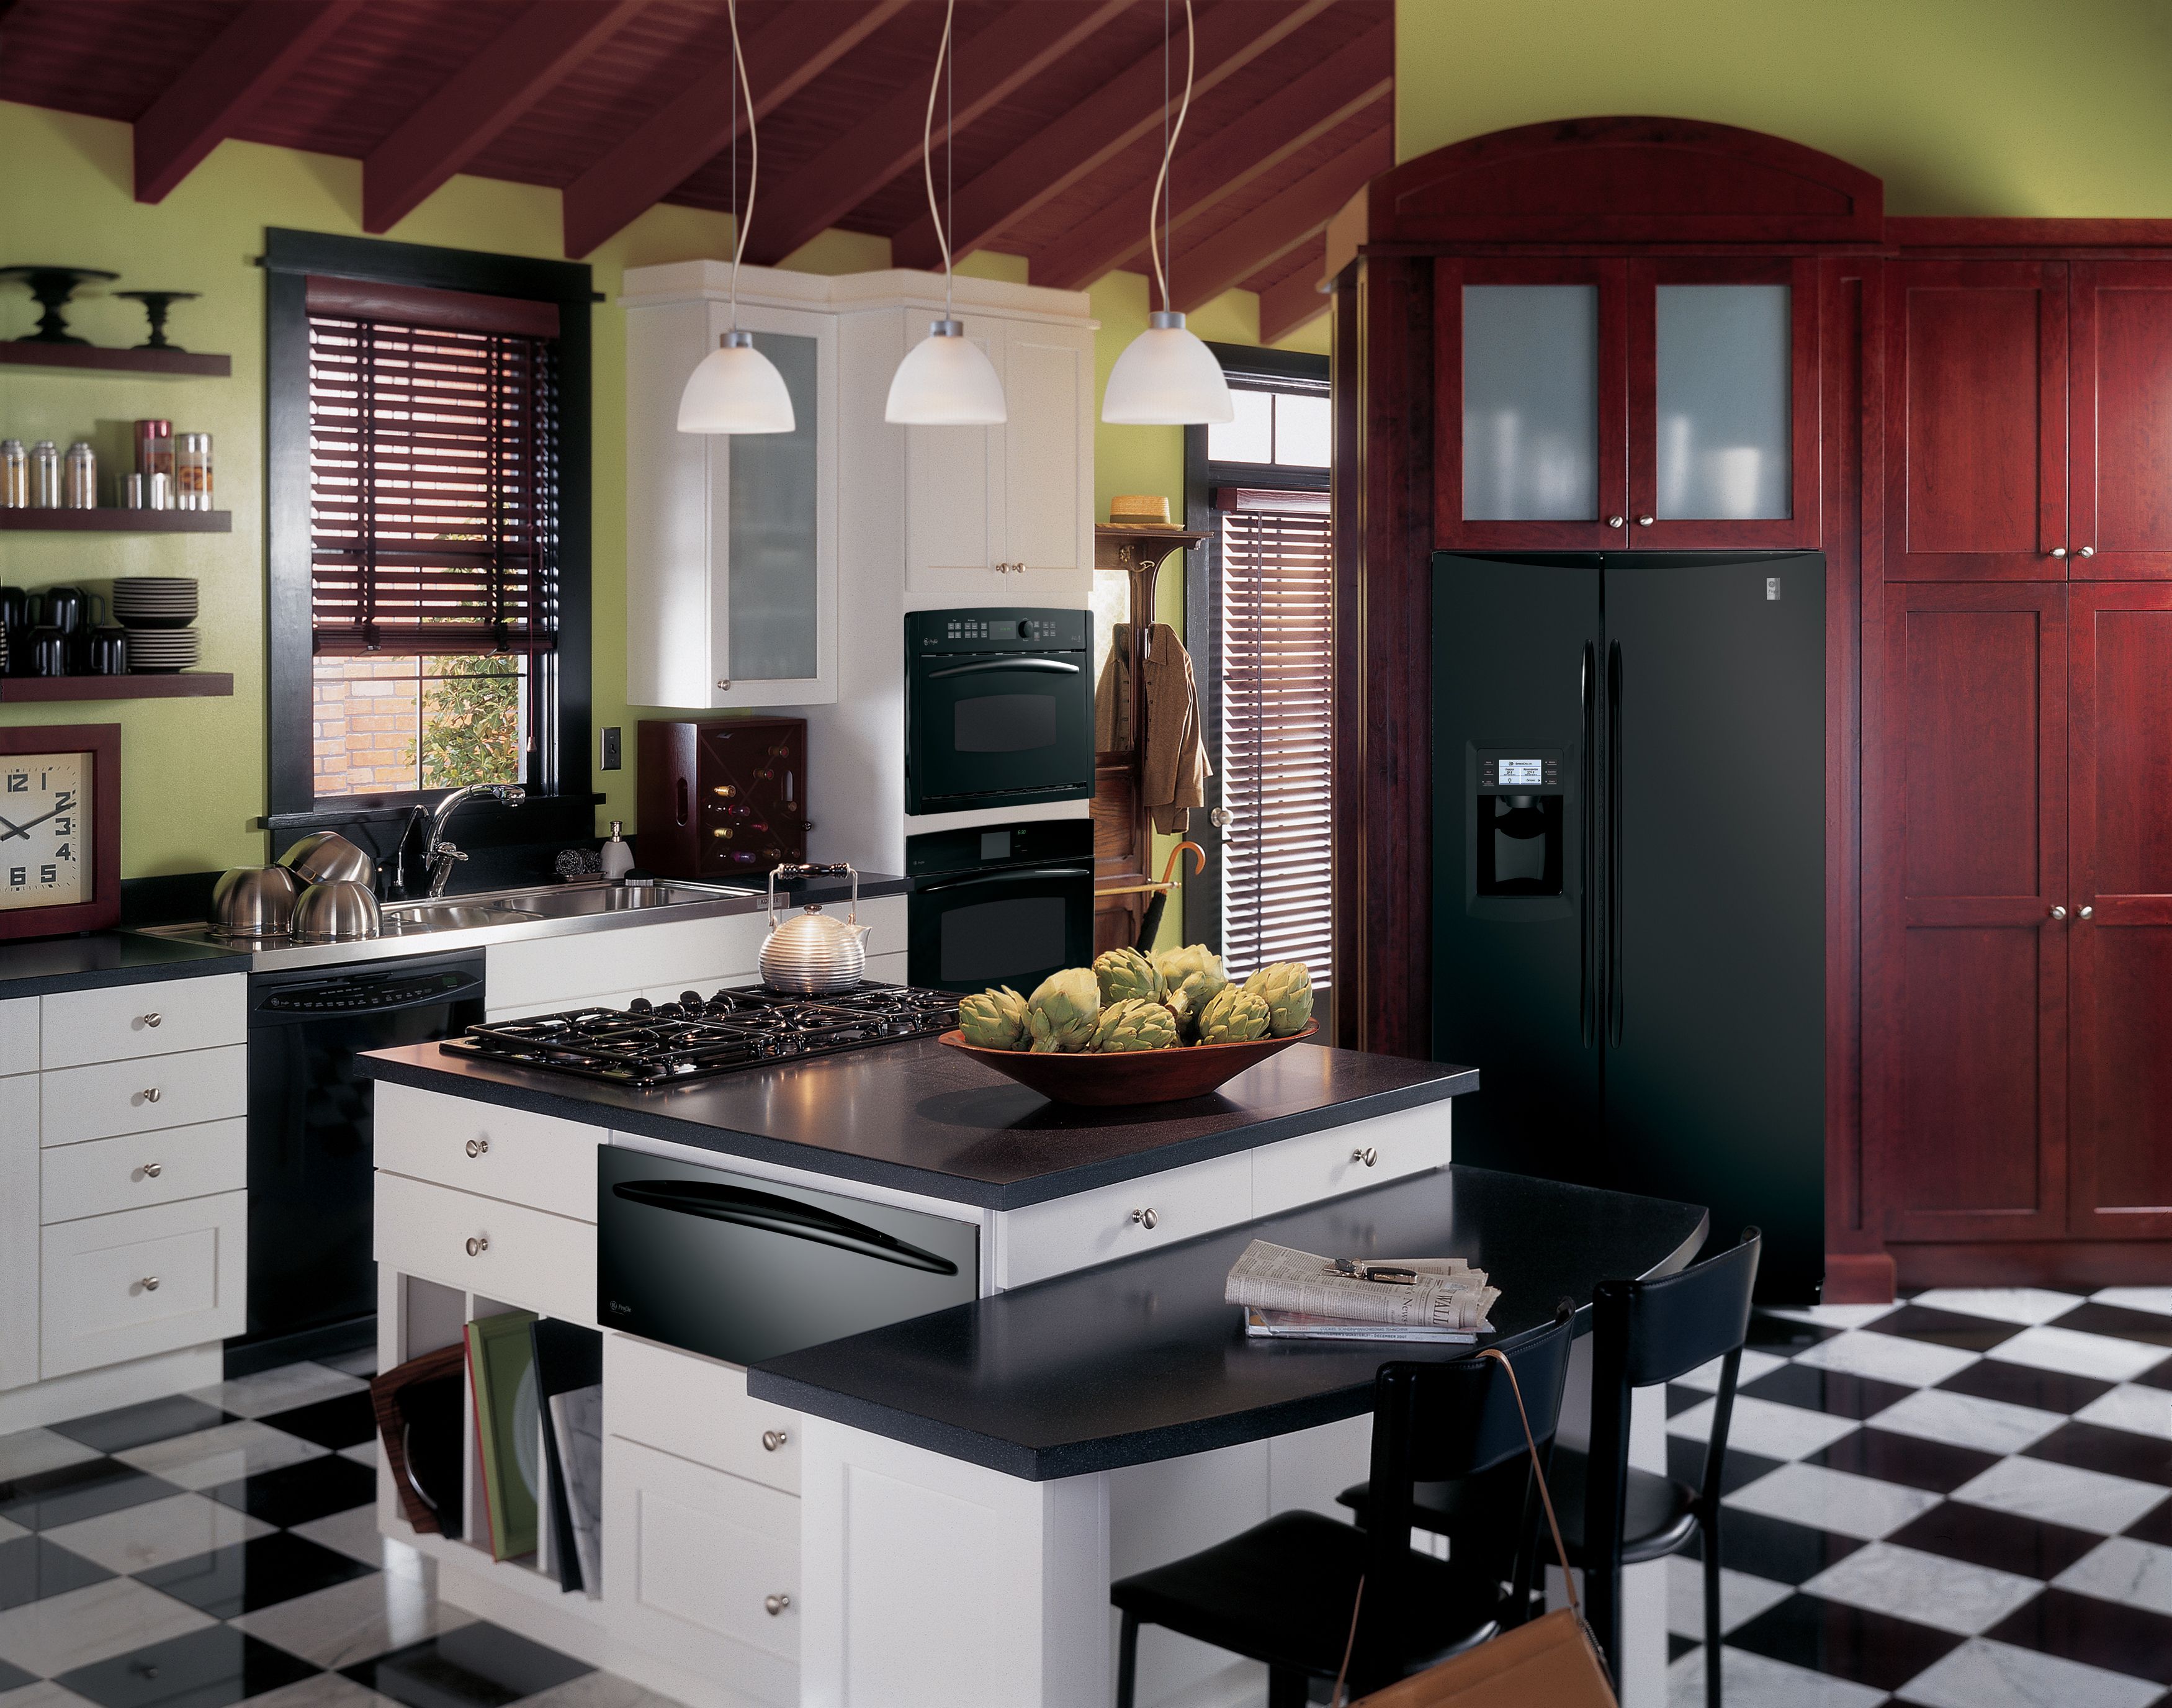 black kitchen cabinets and green walls photo - 5